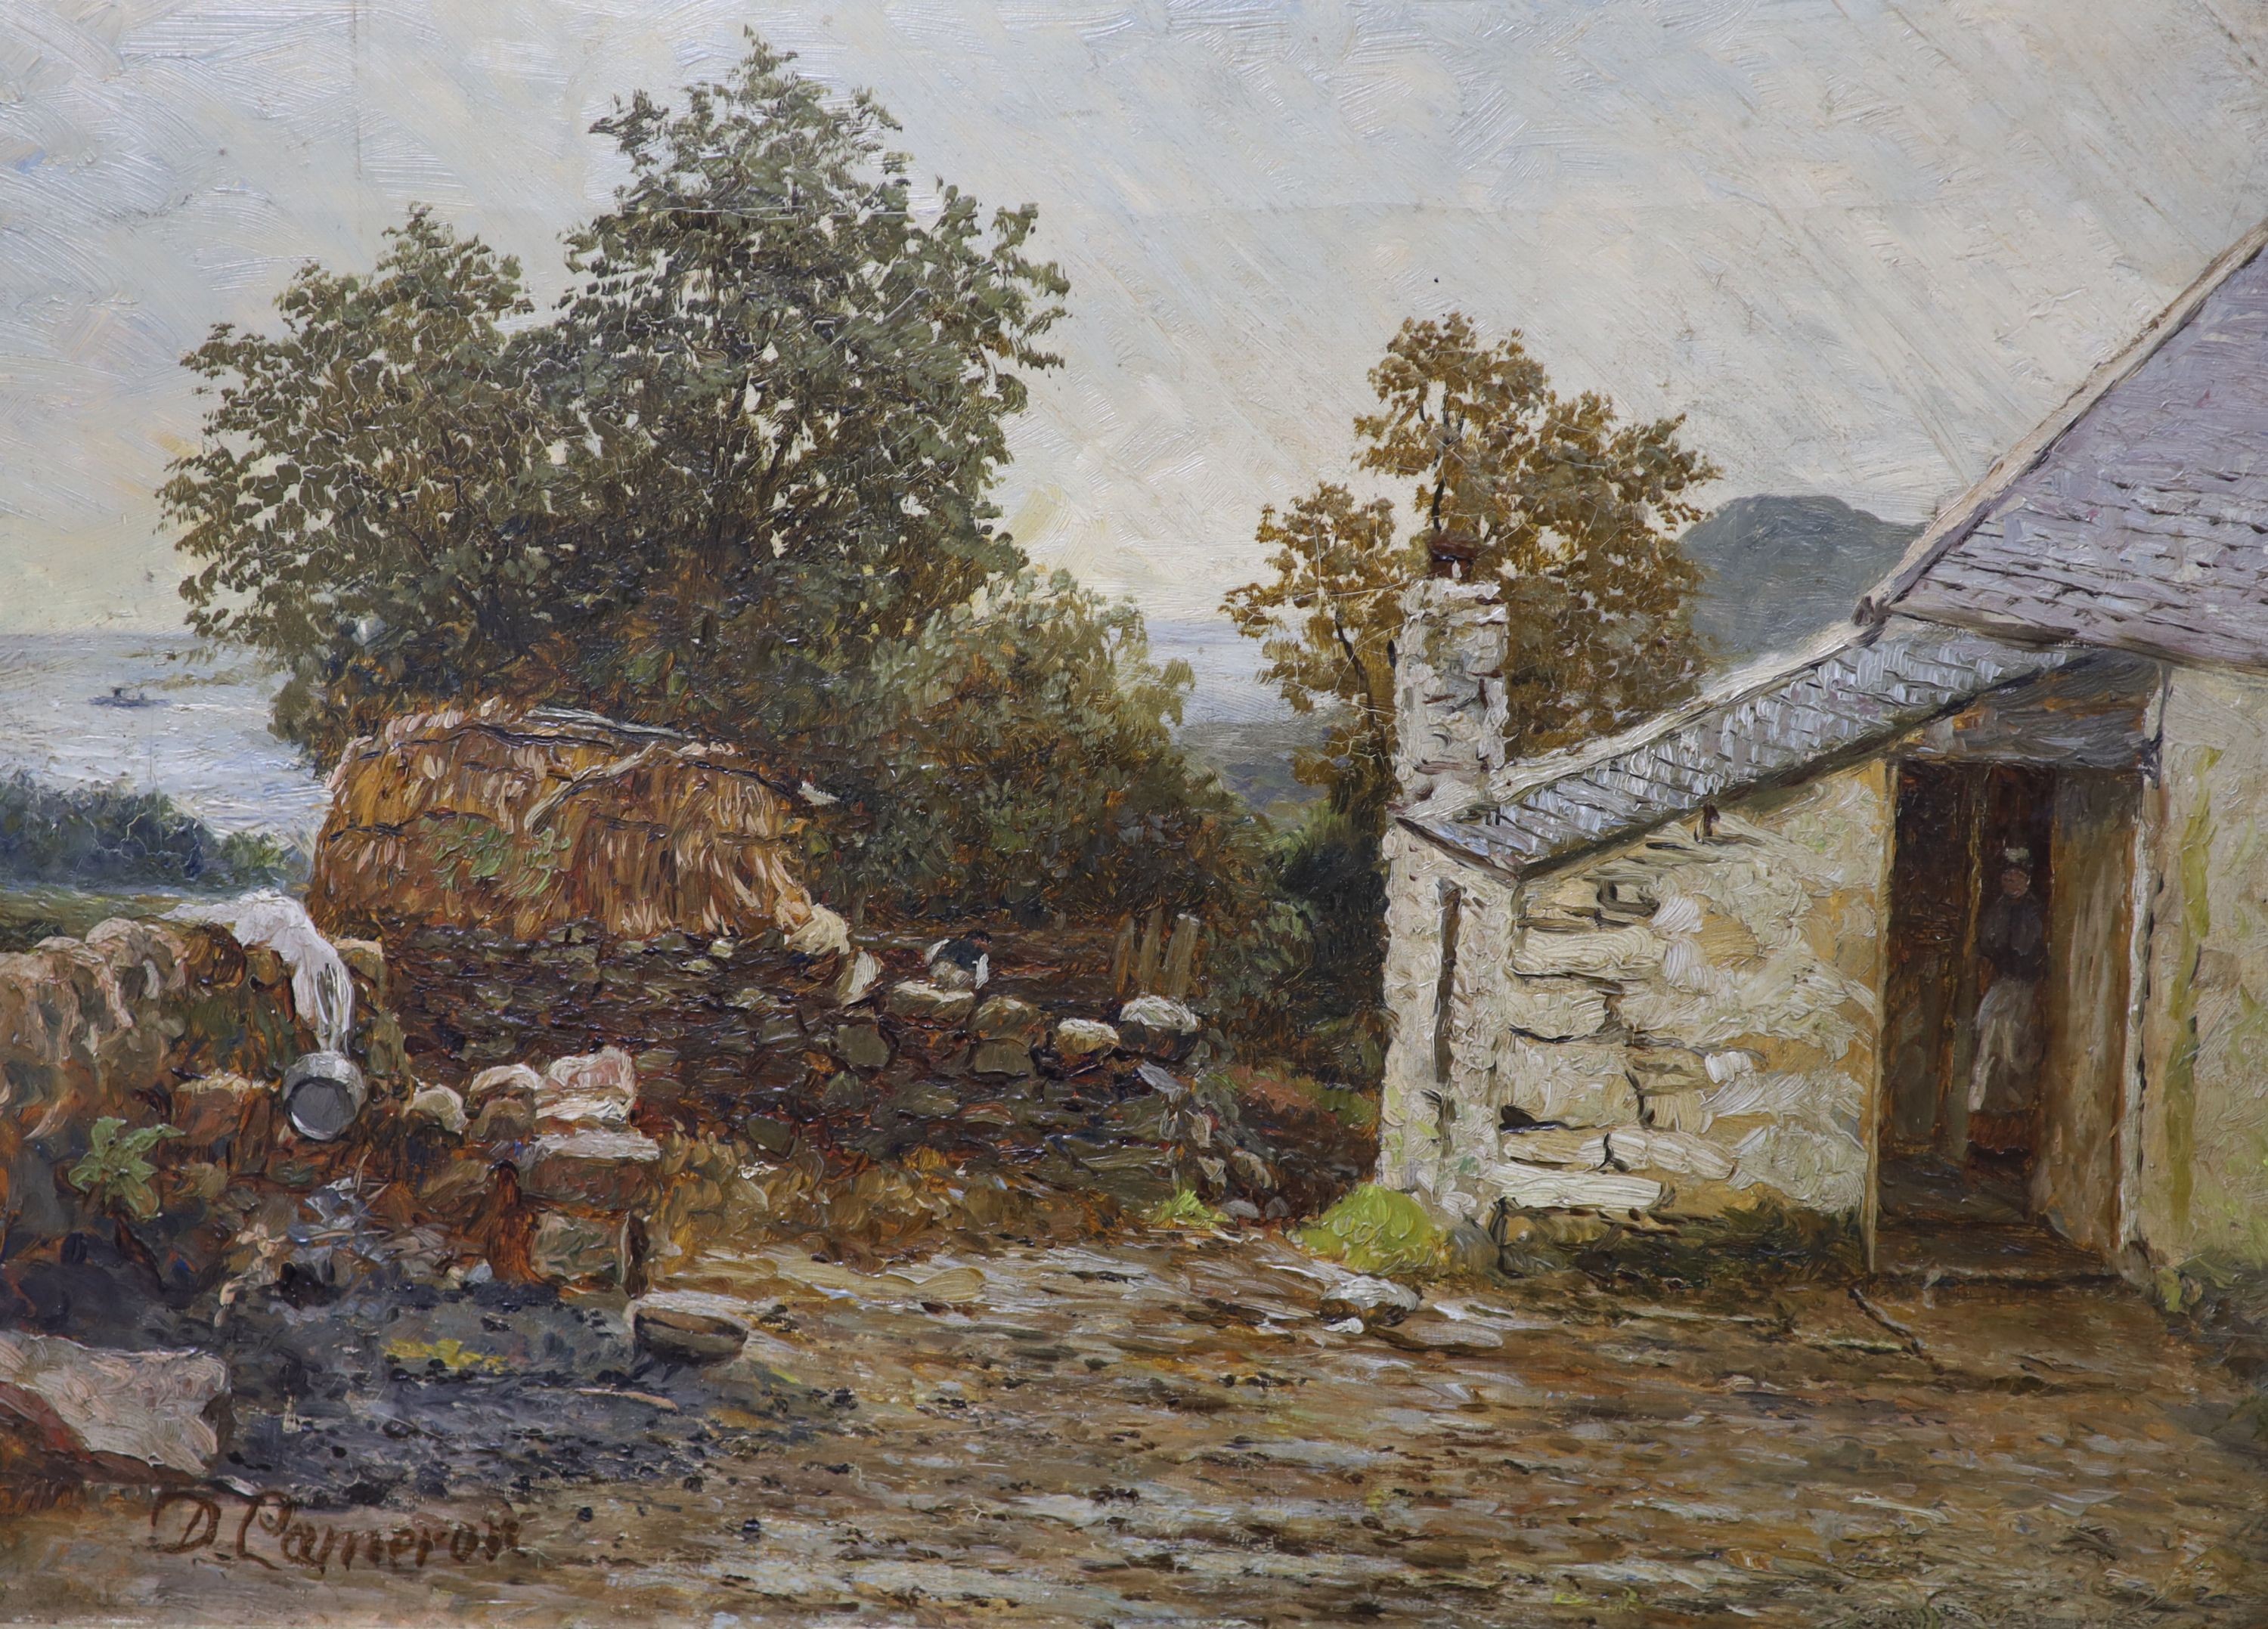 Duncan Cameron (1837-1916), oil on canvas, Study at a farm, signed and inscribed verso, 26 x 36cm